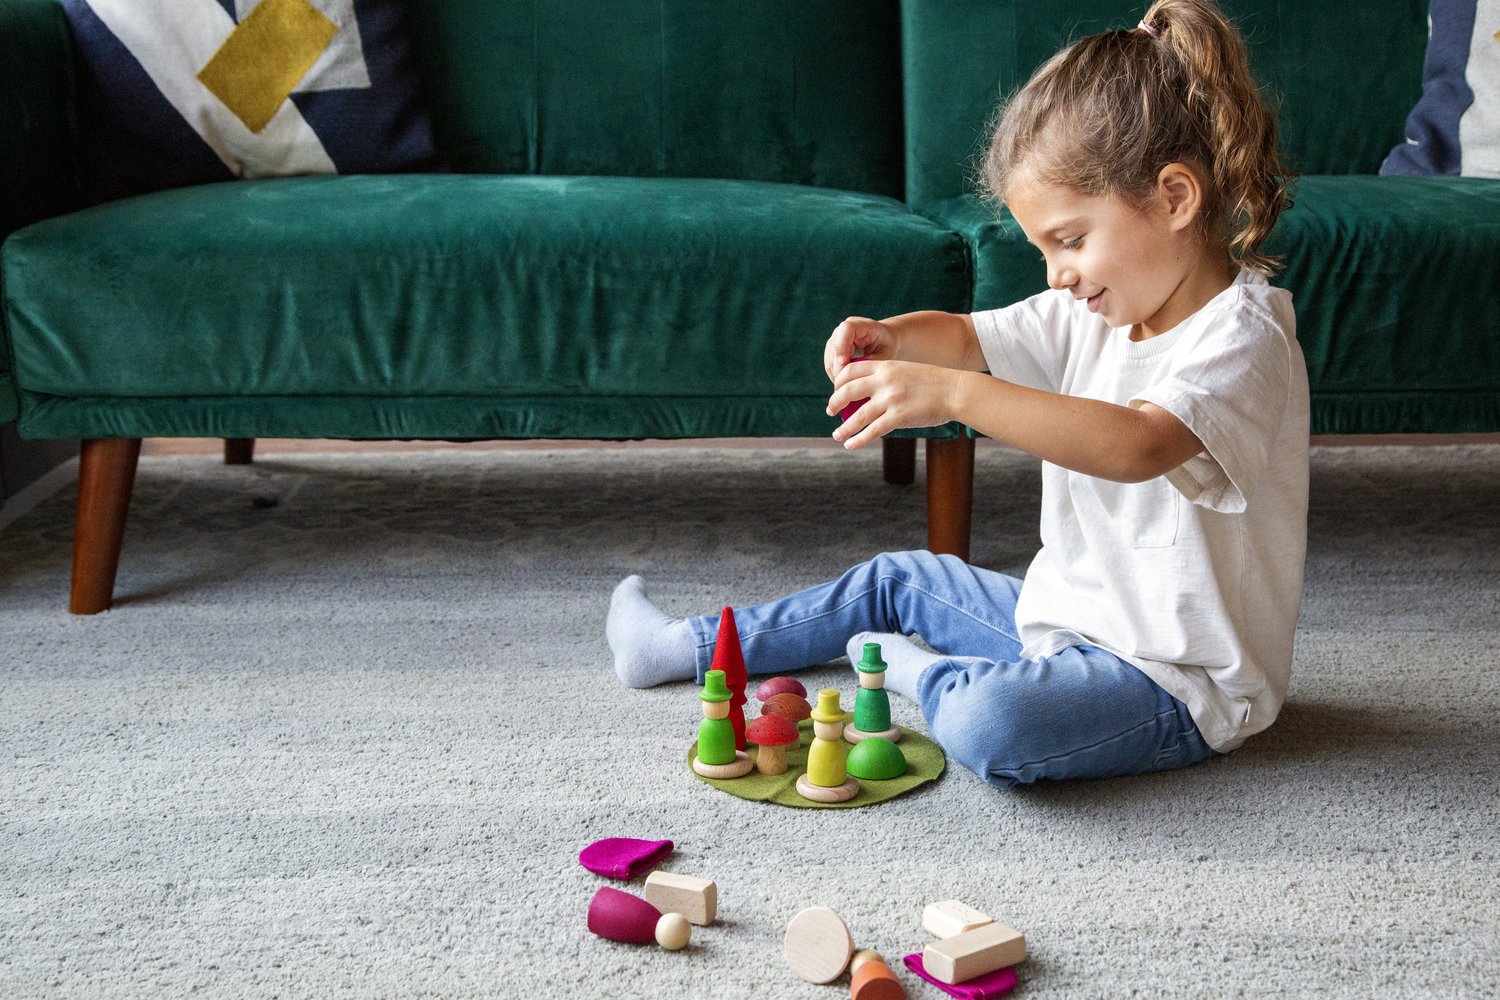 Tiny Earth Toys Raises $1.5 Million to Keep Plastic Out of Landfills